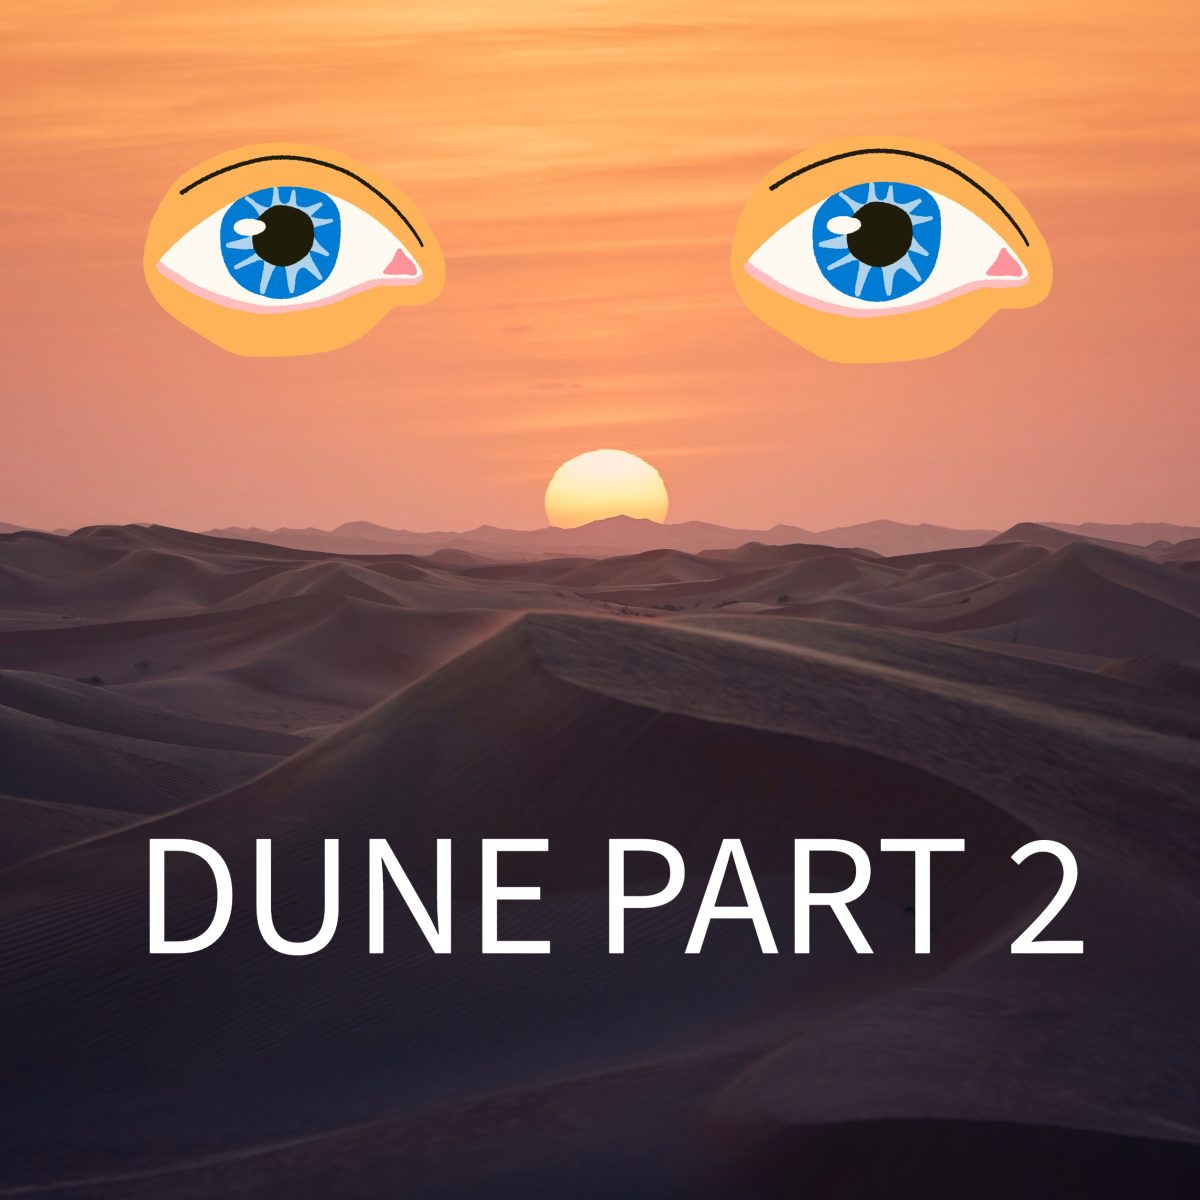 Dune Part Two movie of the year